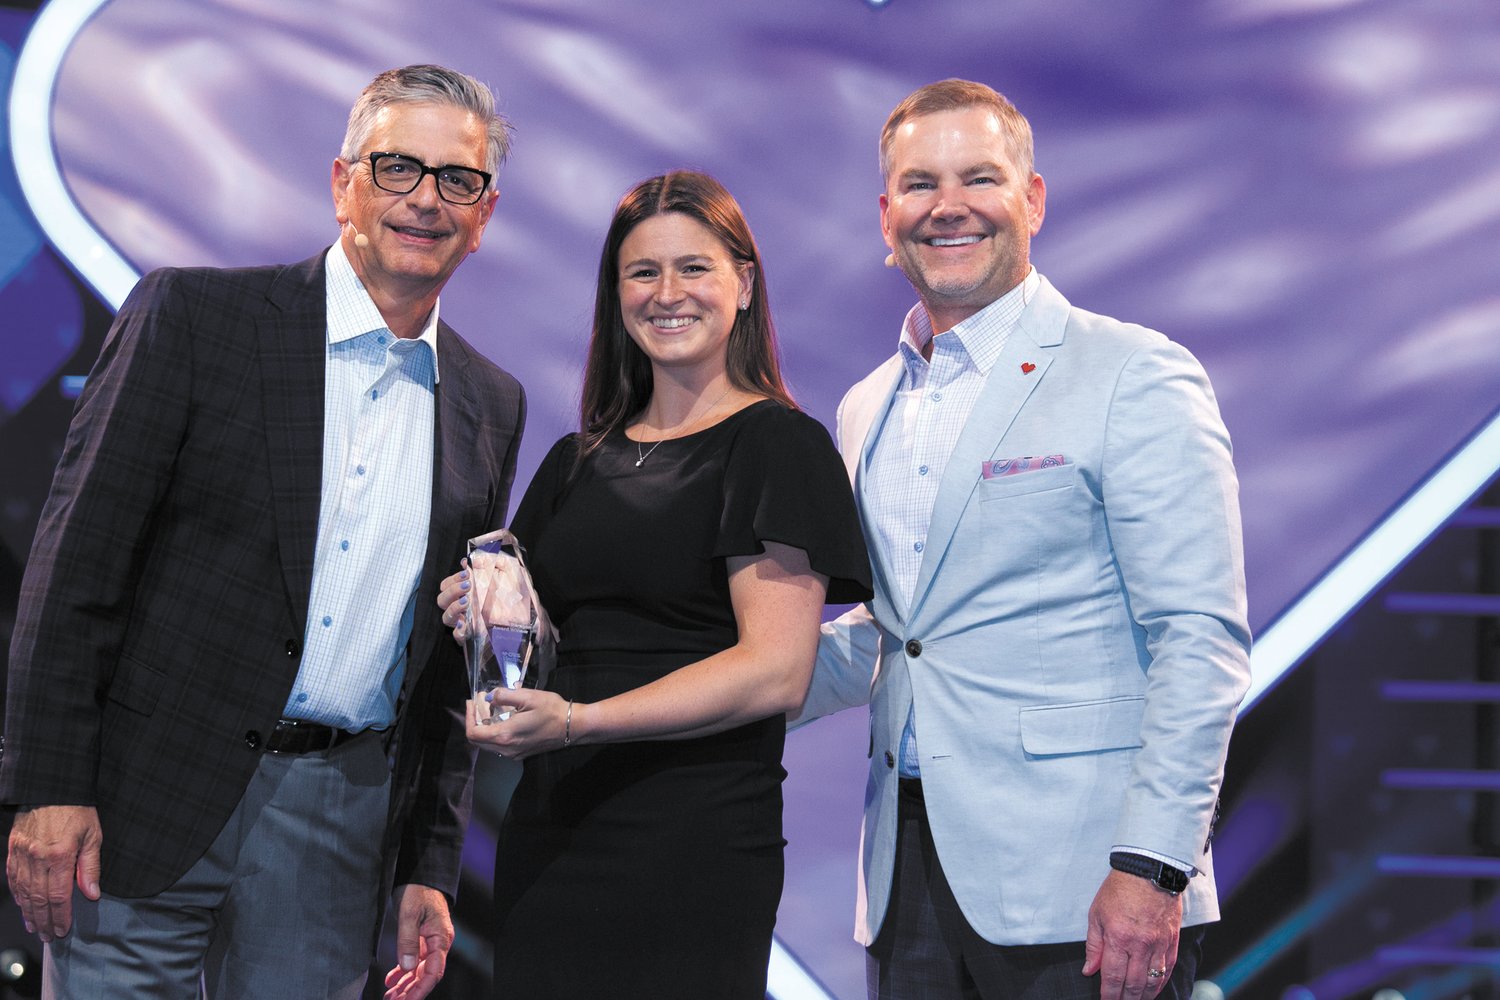 WELL-DESERVED RECOGNITION: Katie Pouliot, pharmacy manager for CVS on Reservoir Avenue, was recently recognized for her efforts and was awarded a 2022 Paragon Award for business leadership and customer service from CVS Health on Aug. 3. Here she is with Senior Vice President of field operations Brian Bosnic (left) and Senior Vice President of field operations Jeff Schmidt.